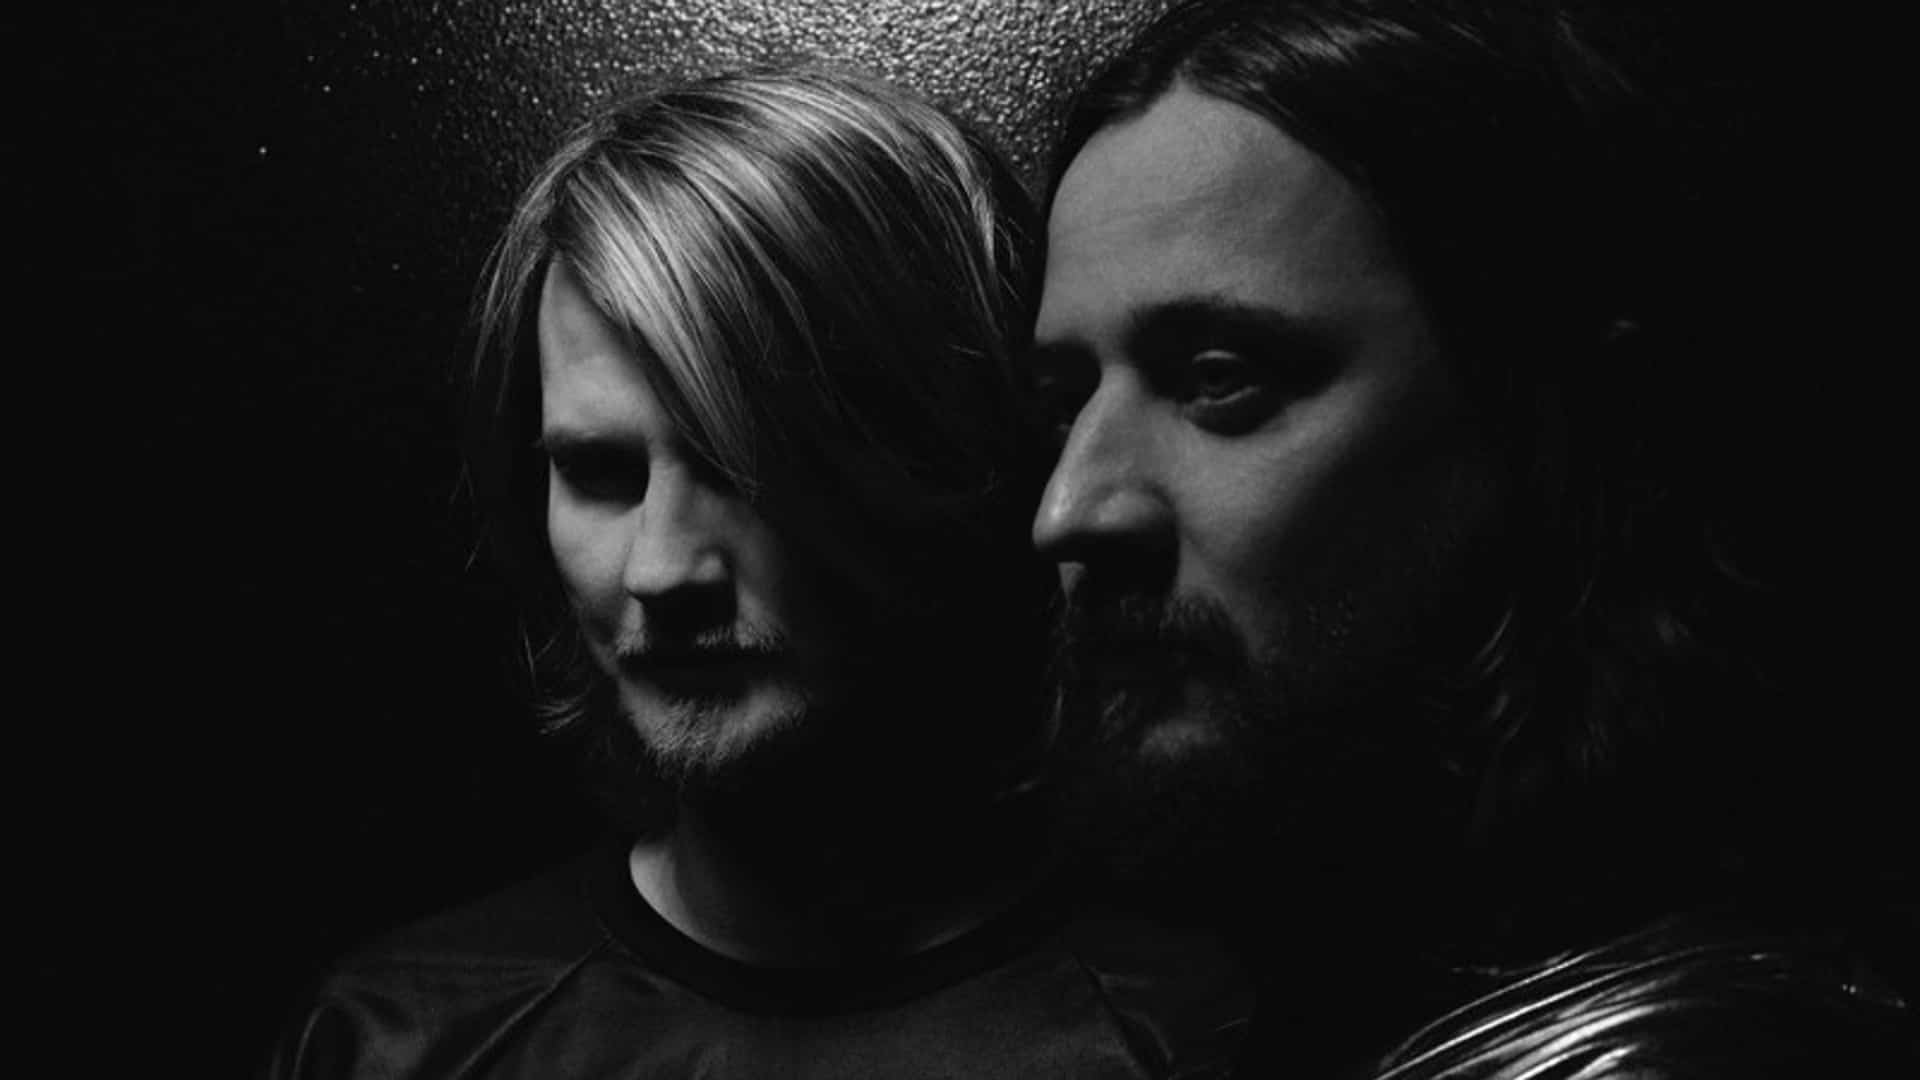 Röyksopp ‘Melody A.M.’ is one of the most expensive vinyl sold in history